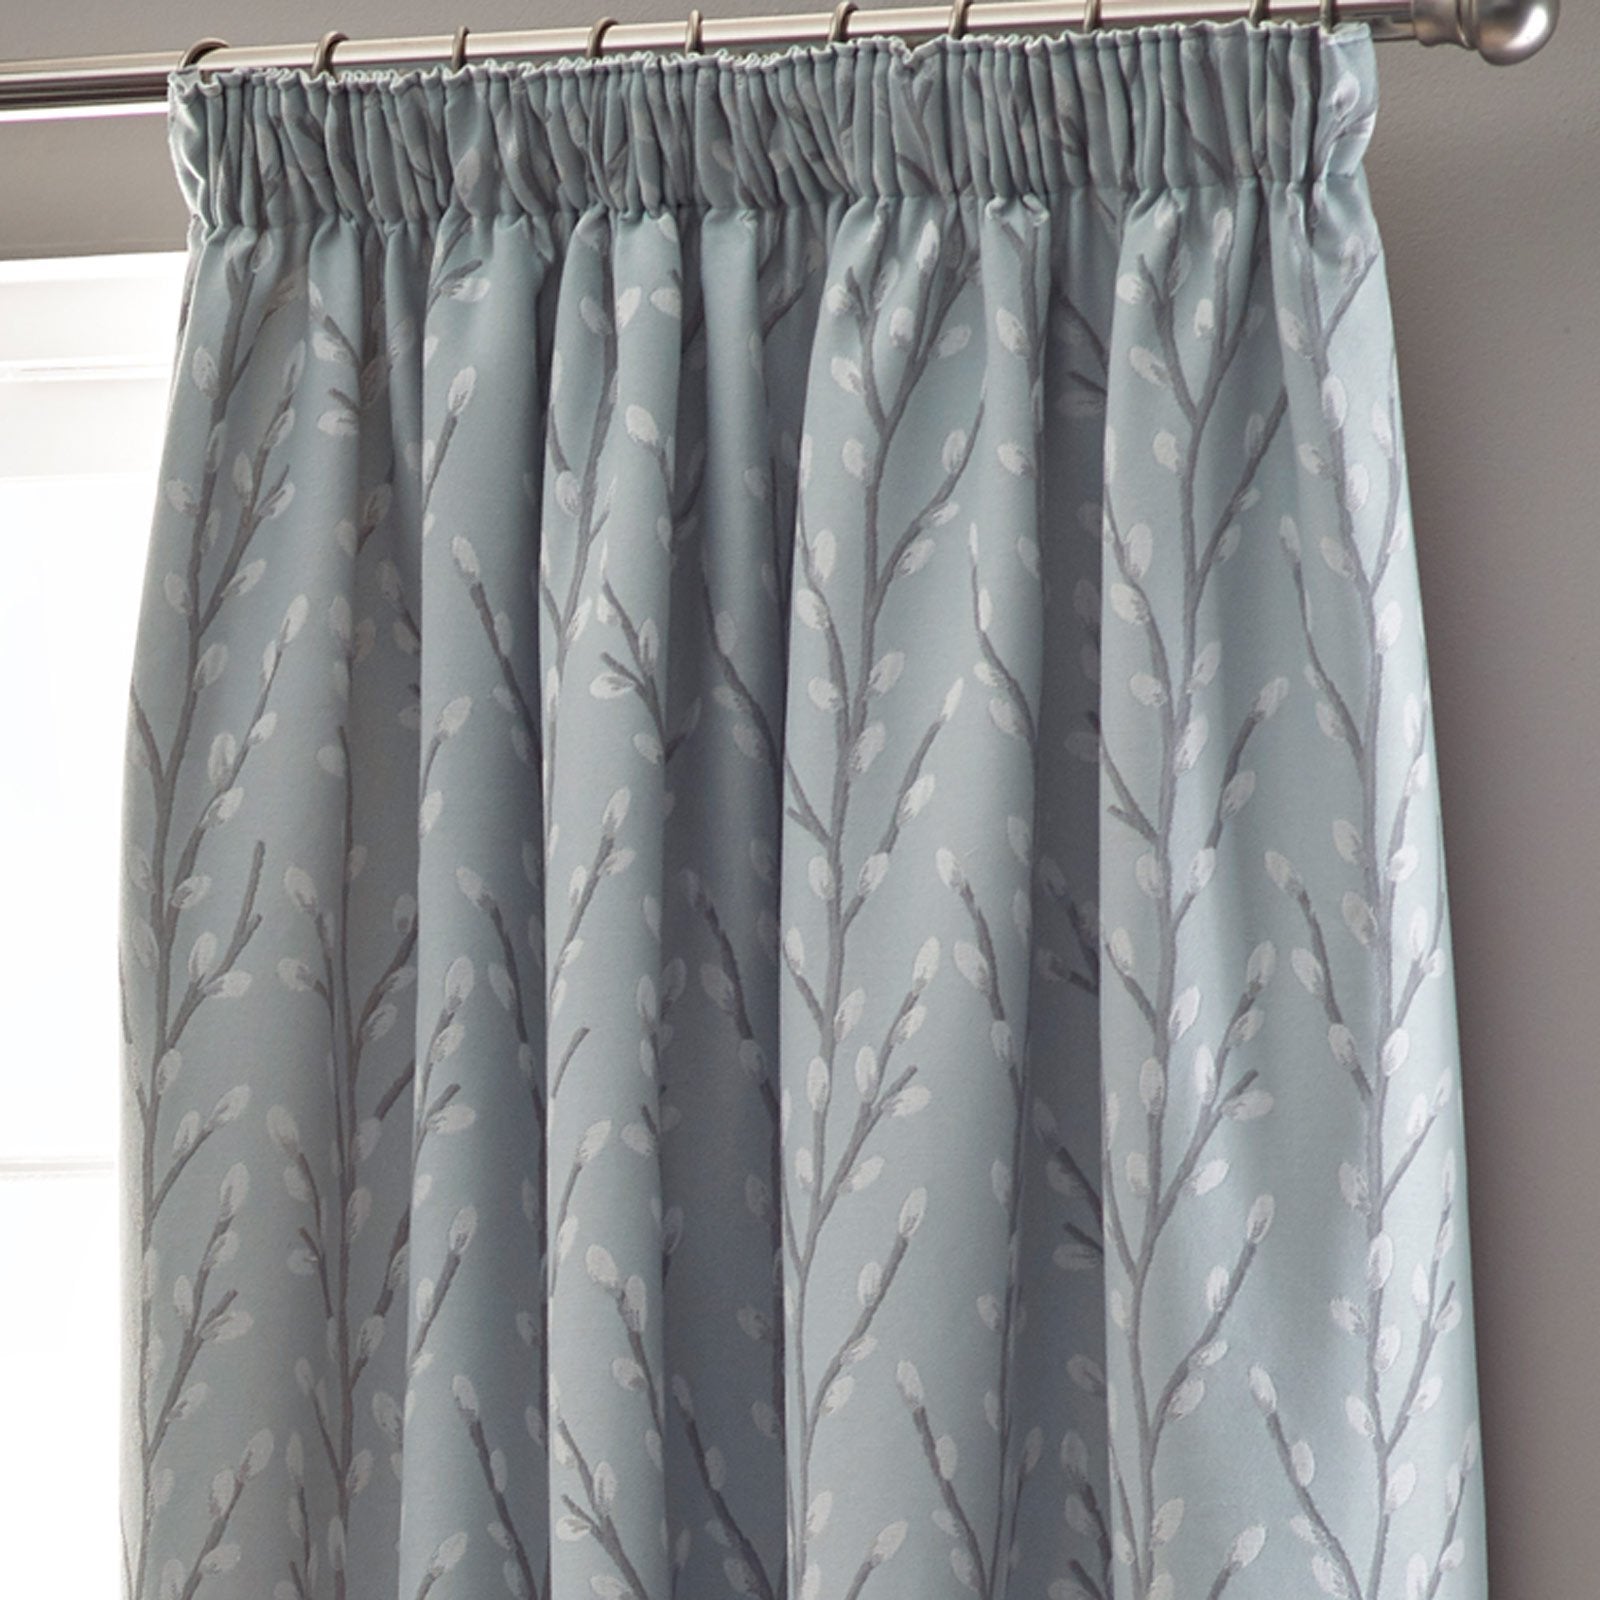 Sienna Lined Pencil Pleat Curtains - Duck Egg